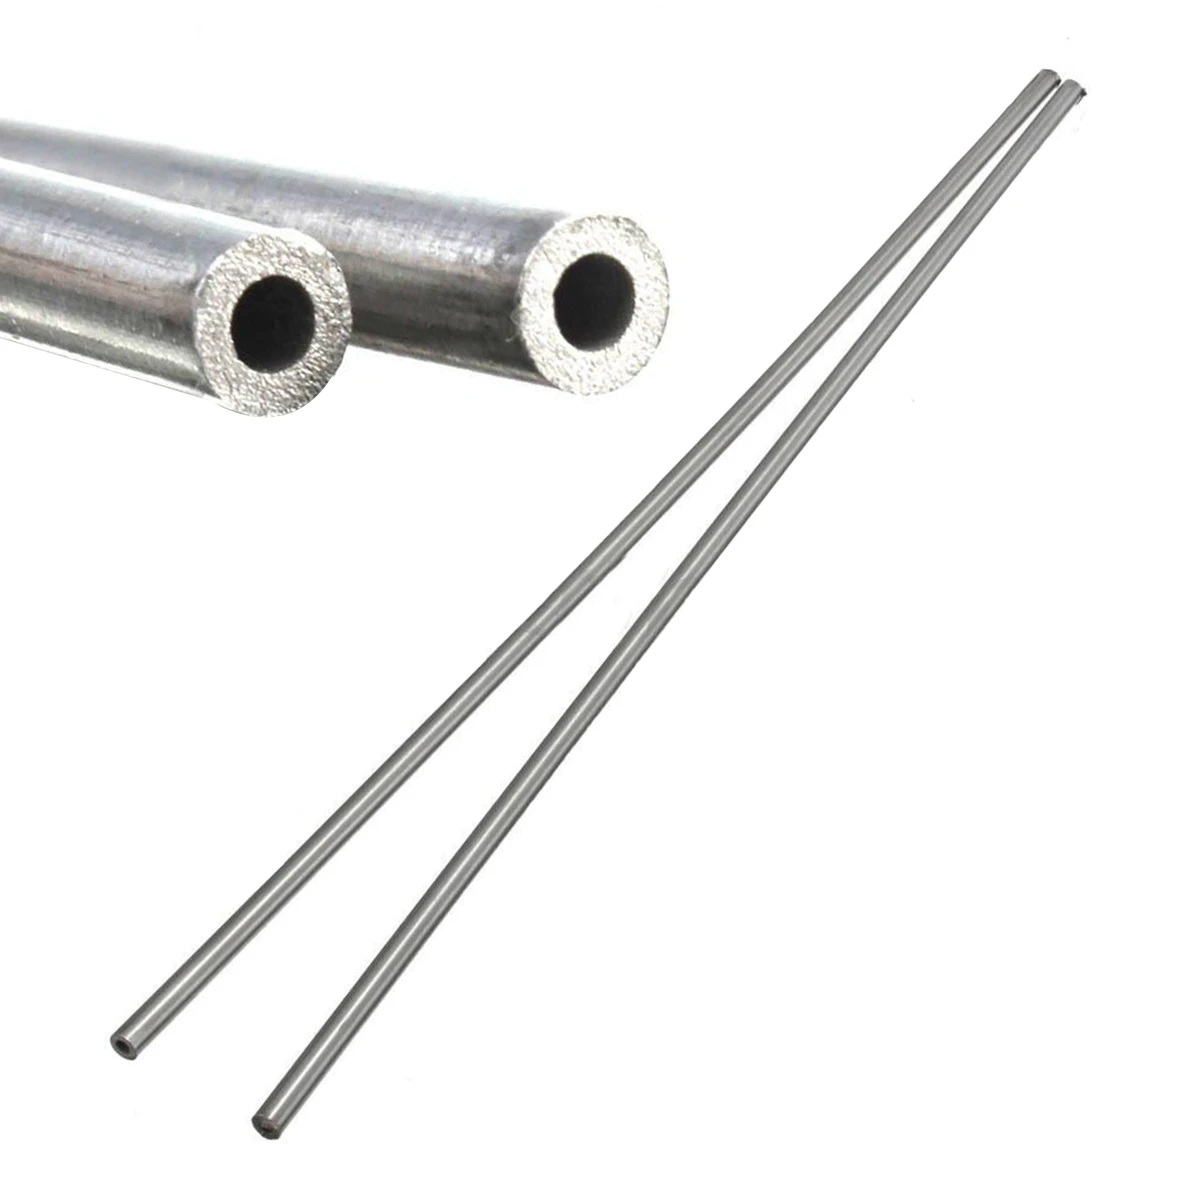 Length 250mm Metal ToolOD 304 Stainless Steel Capillary Tube OD 4mm x 3mm ID